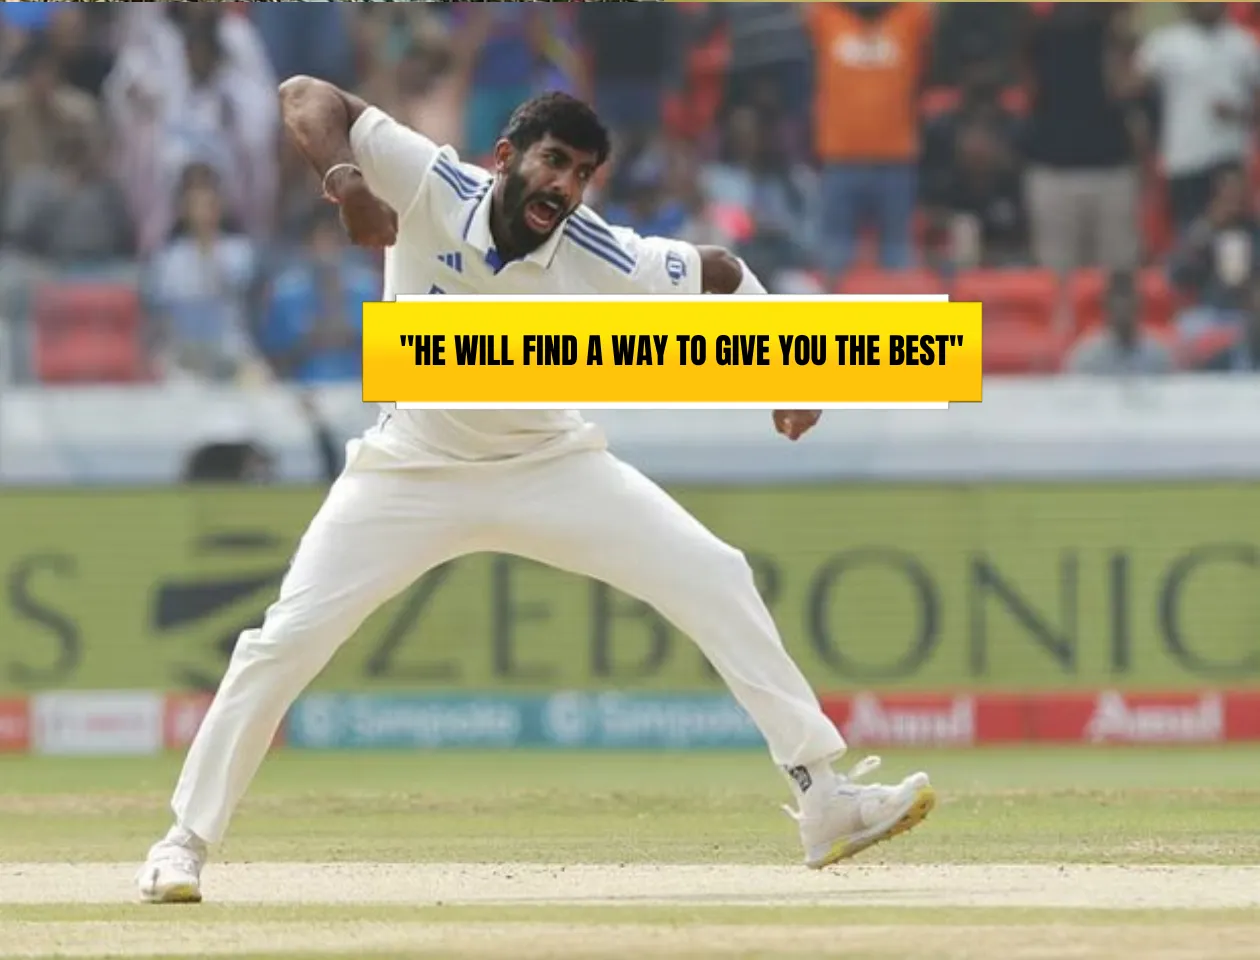 Dinesh Karthik heaps praise on Jasprit Bumrah after his impressive spell in 1st Test against England, calls him 'modern-day great'